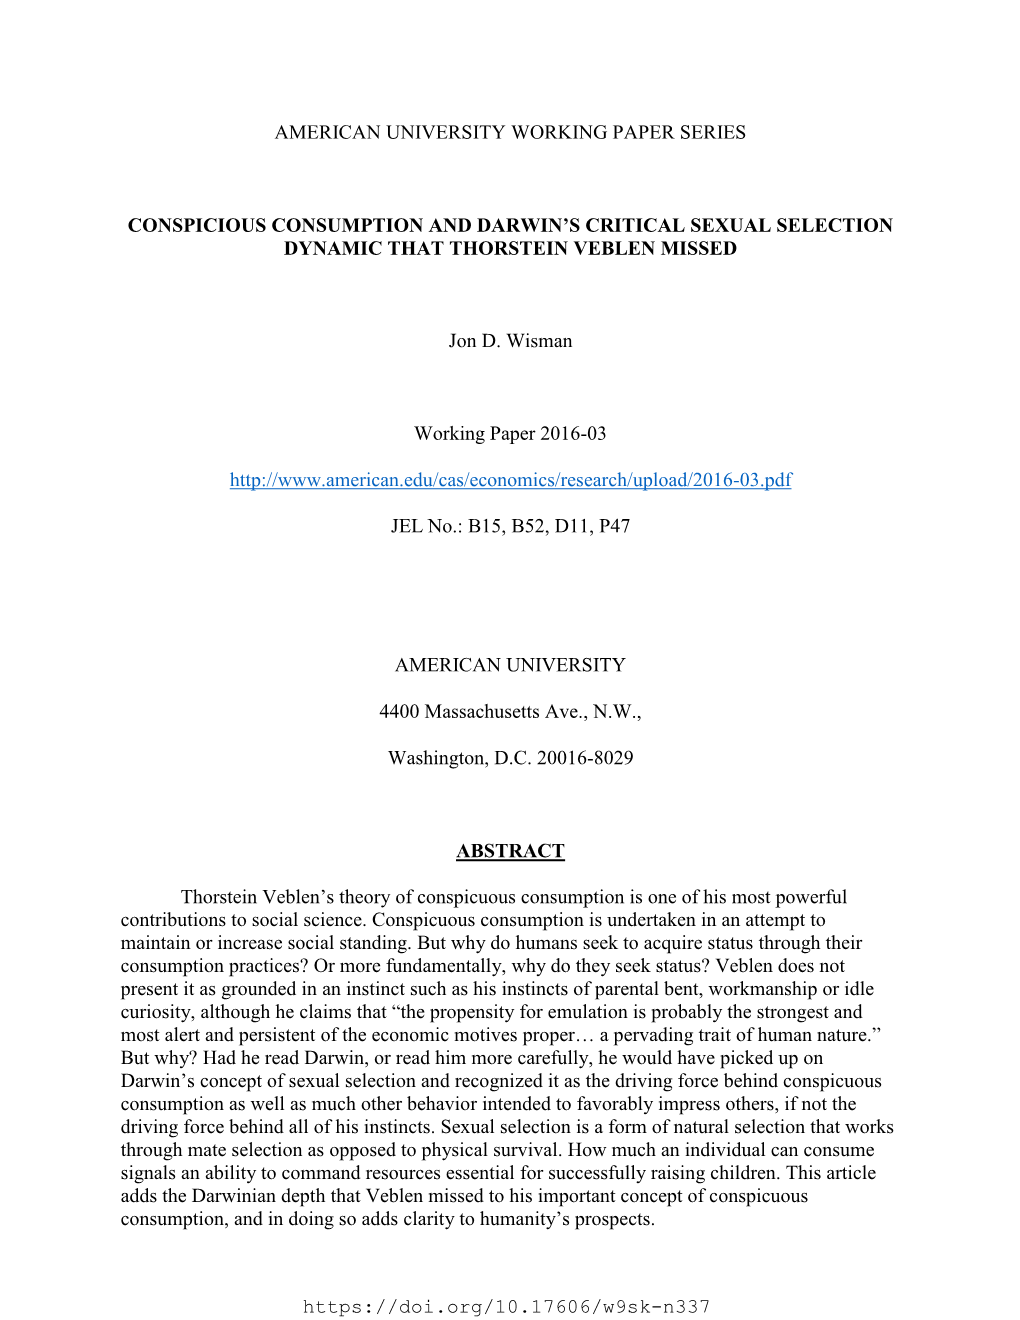 American University Working Paper Series Conspicious